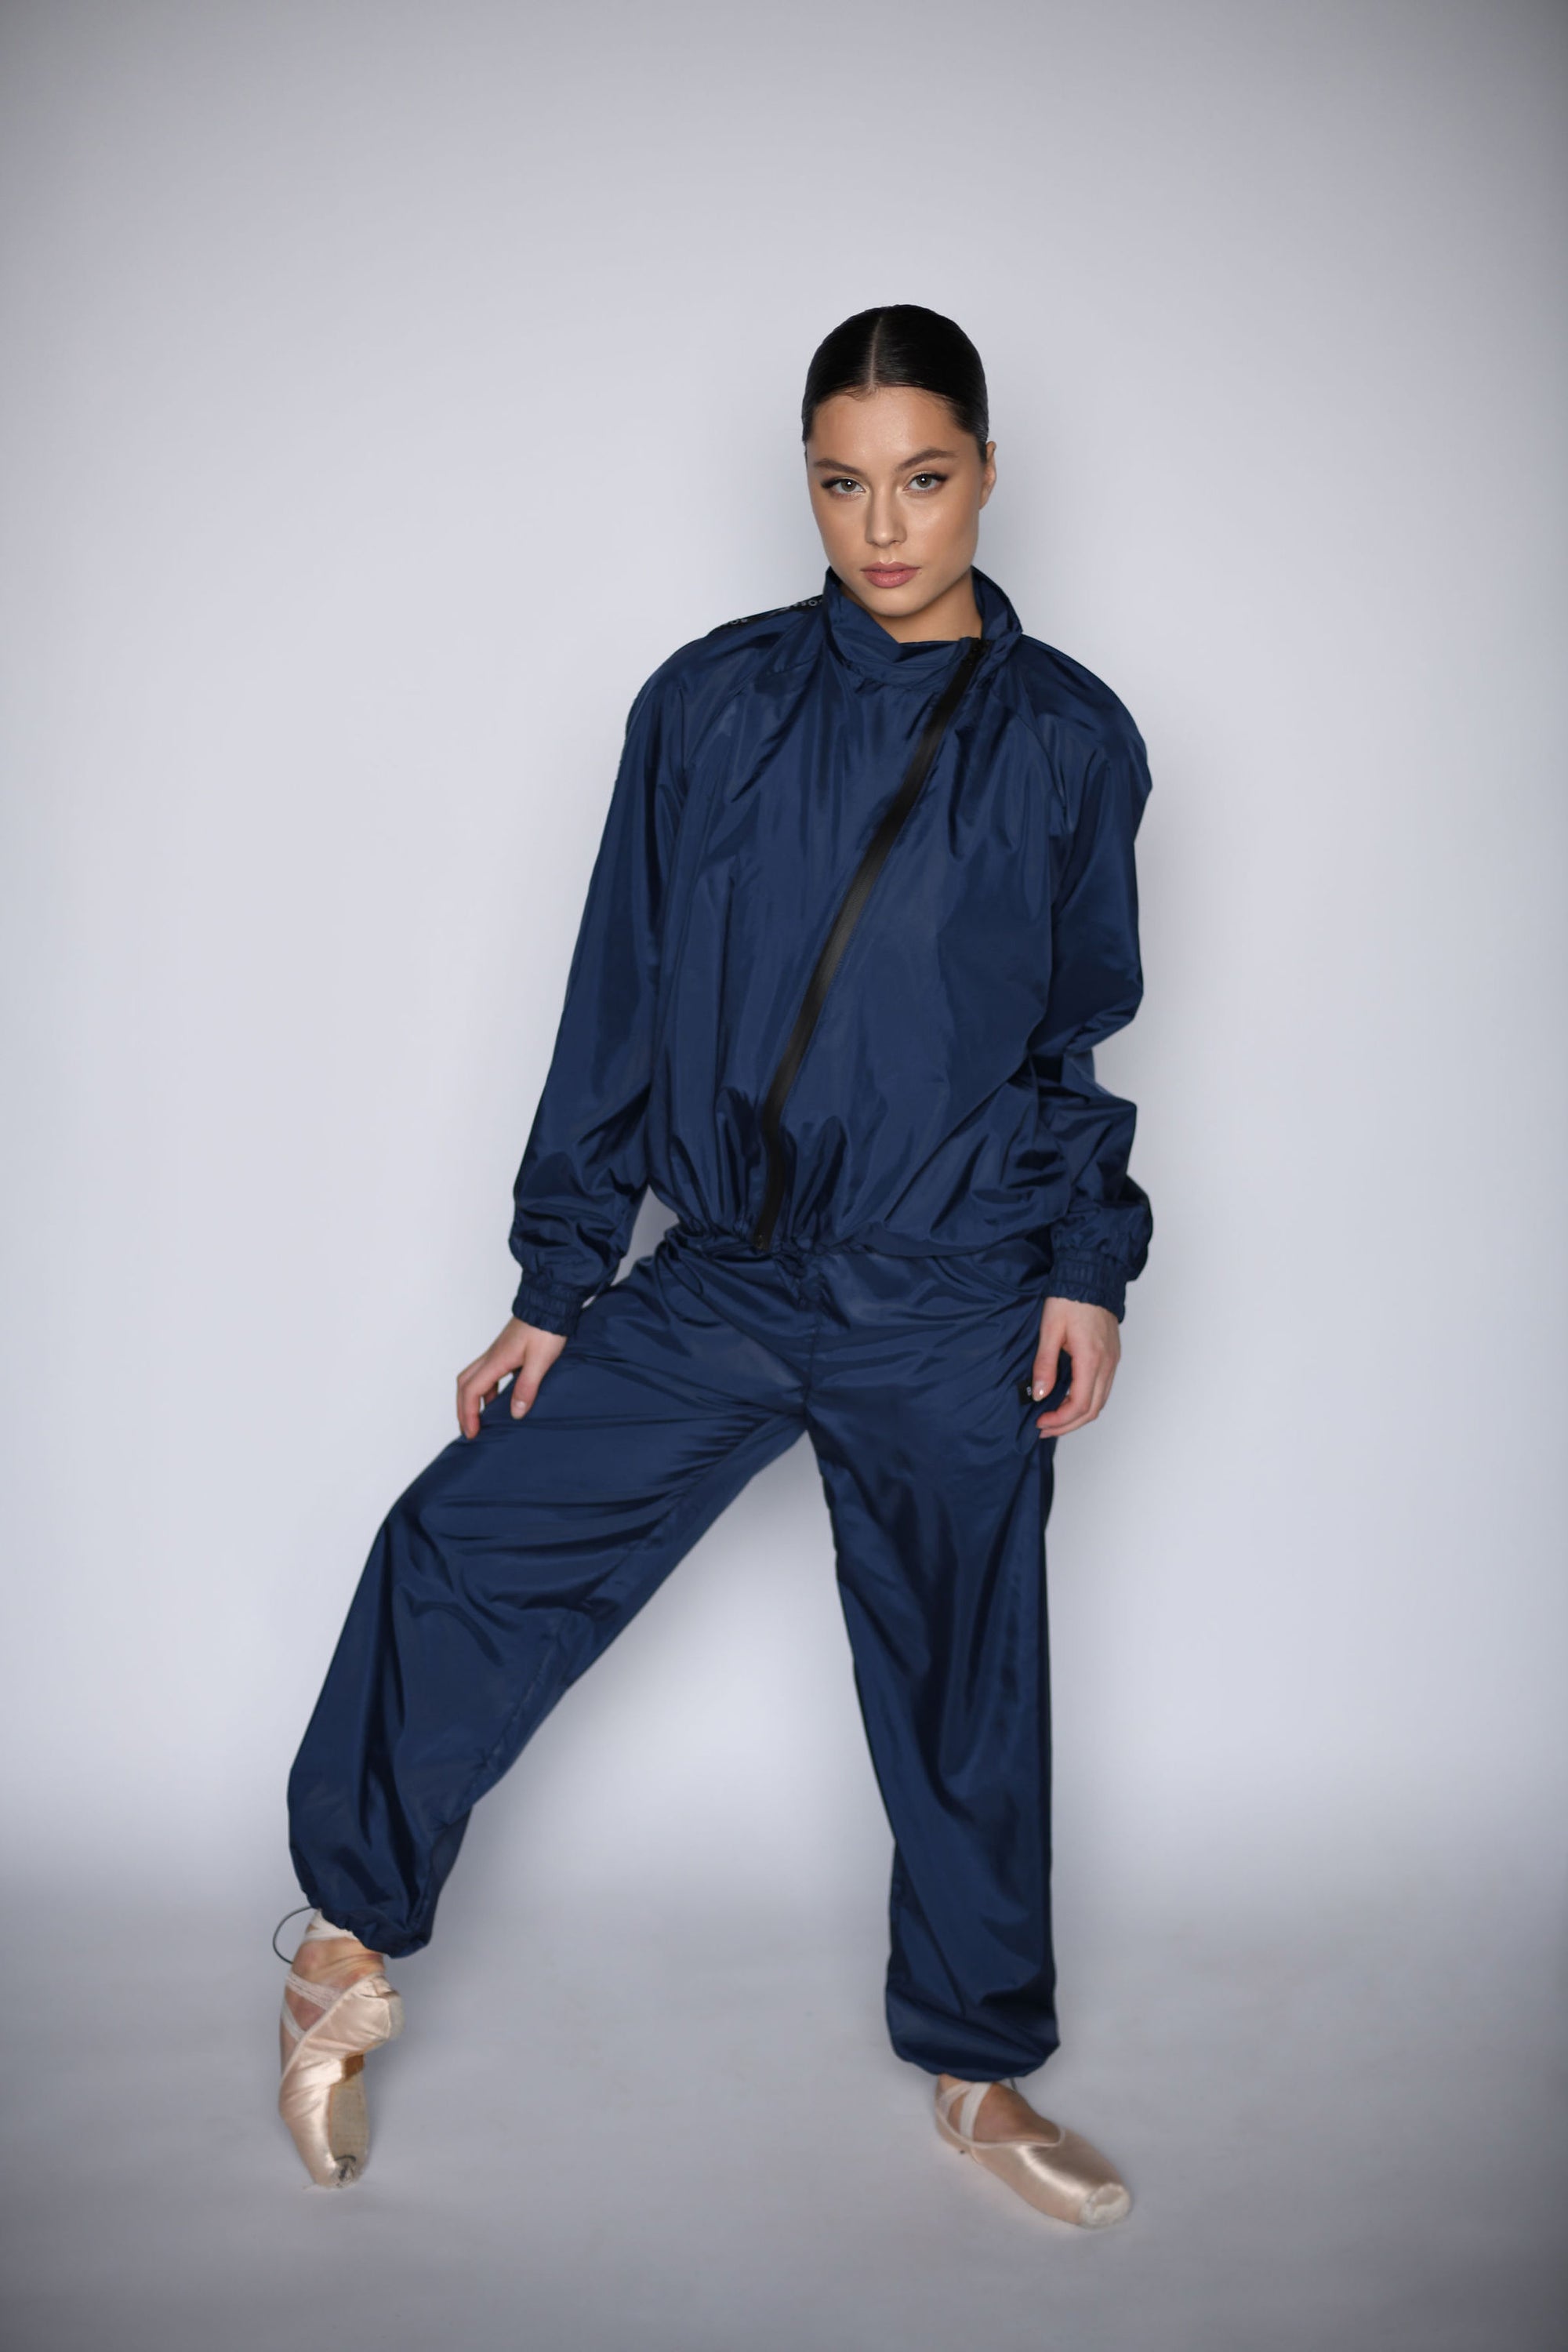 NEW URBAN SWAN COLLECTION S/S 23 | Royal blue sports suit with pants + shorts